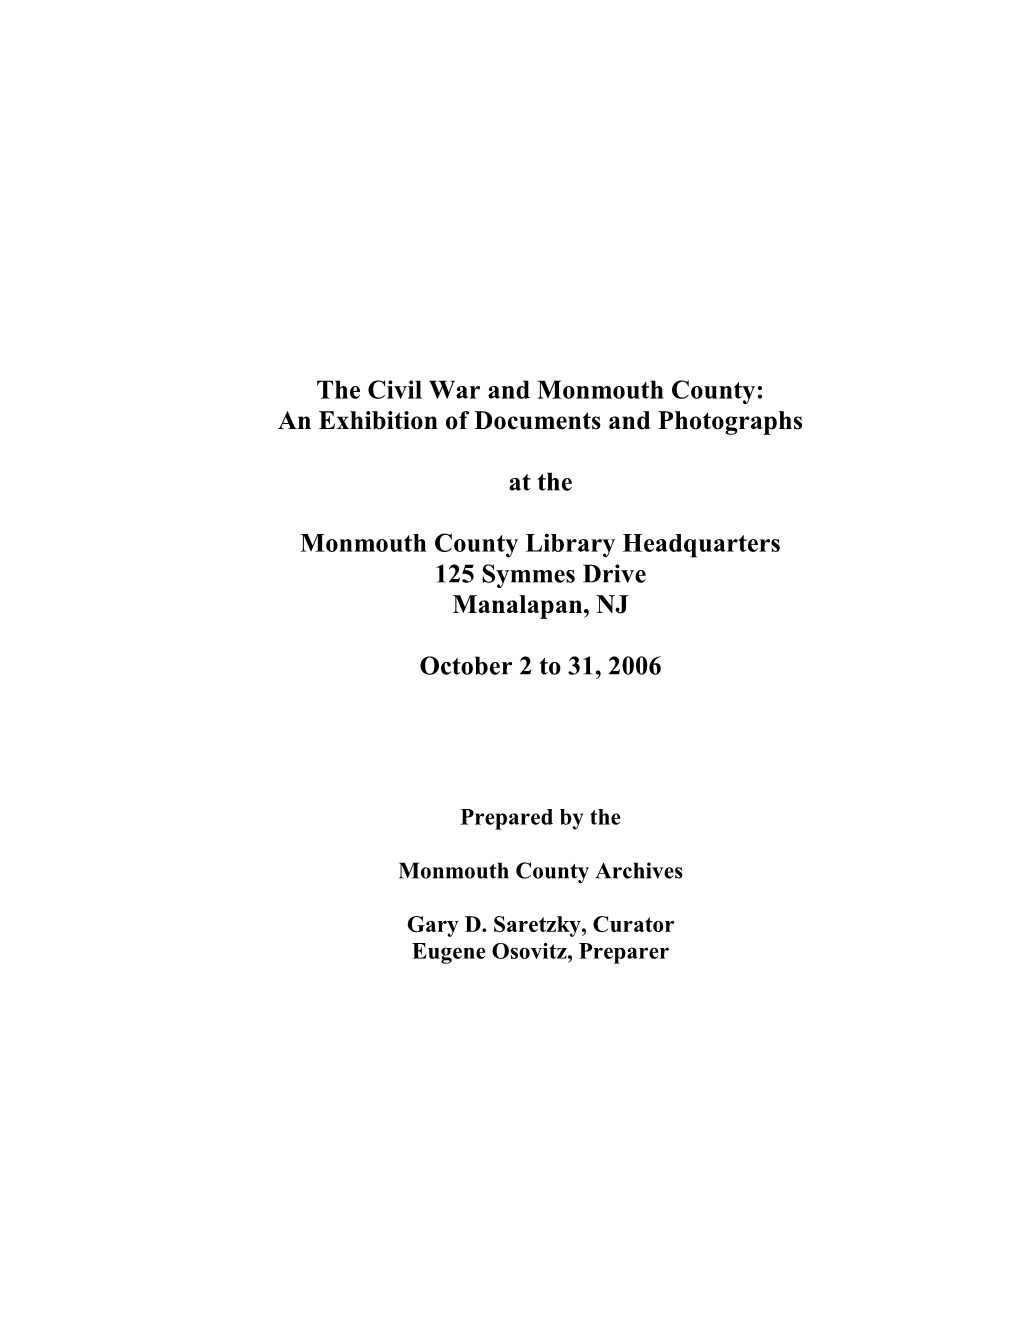 The Civil War and Monmouth County: an Exhibition of Documents and Photographs